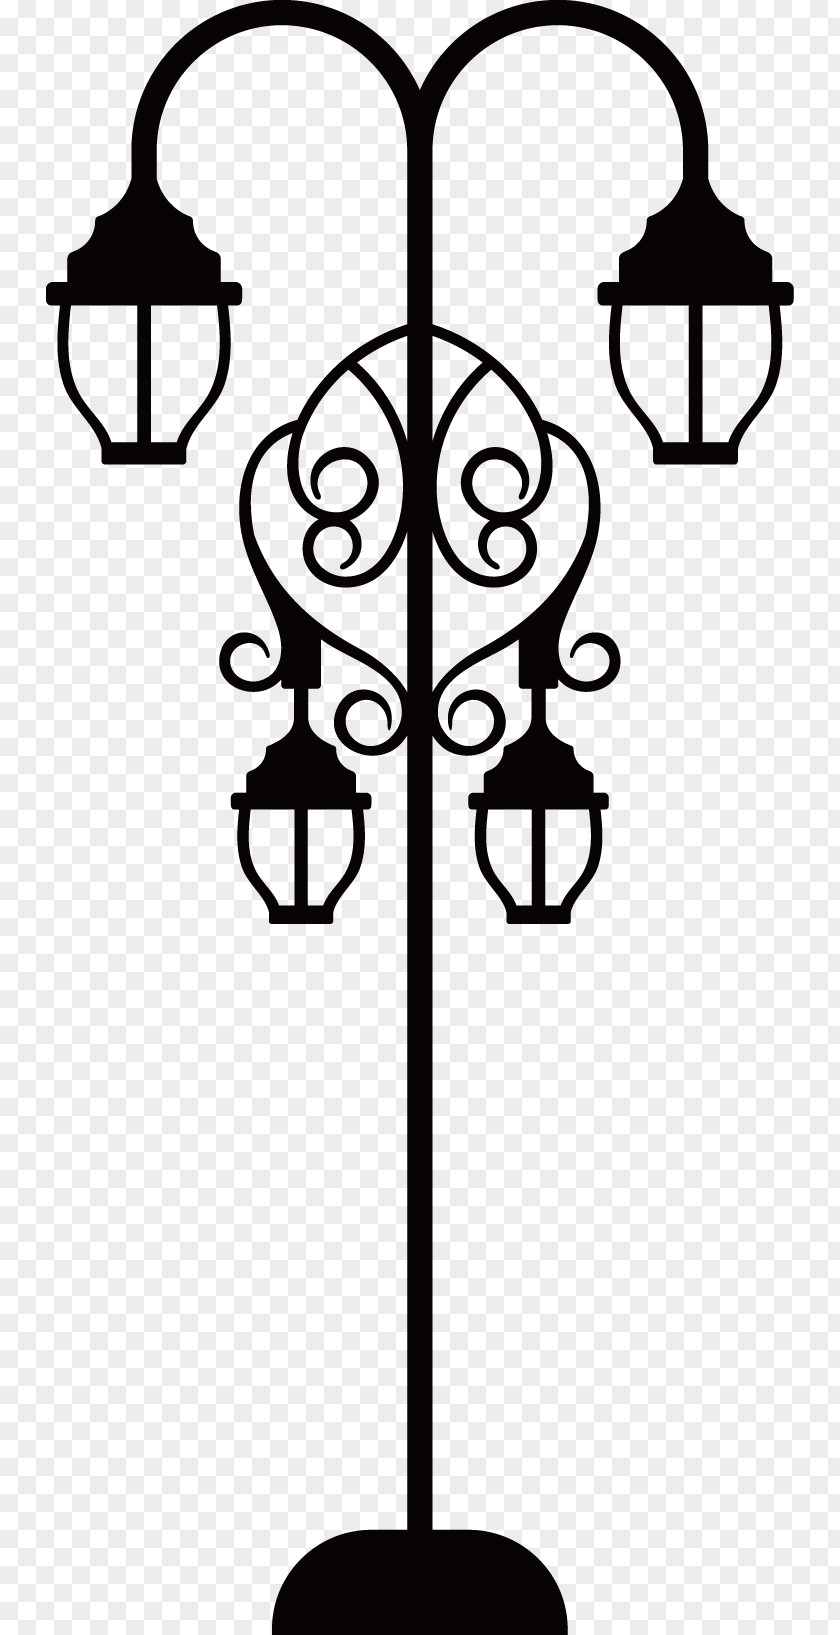 Vector Retro Street Light Black And White PNG